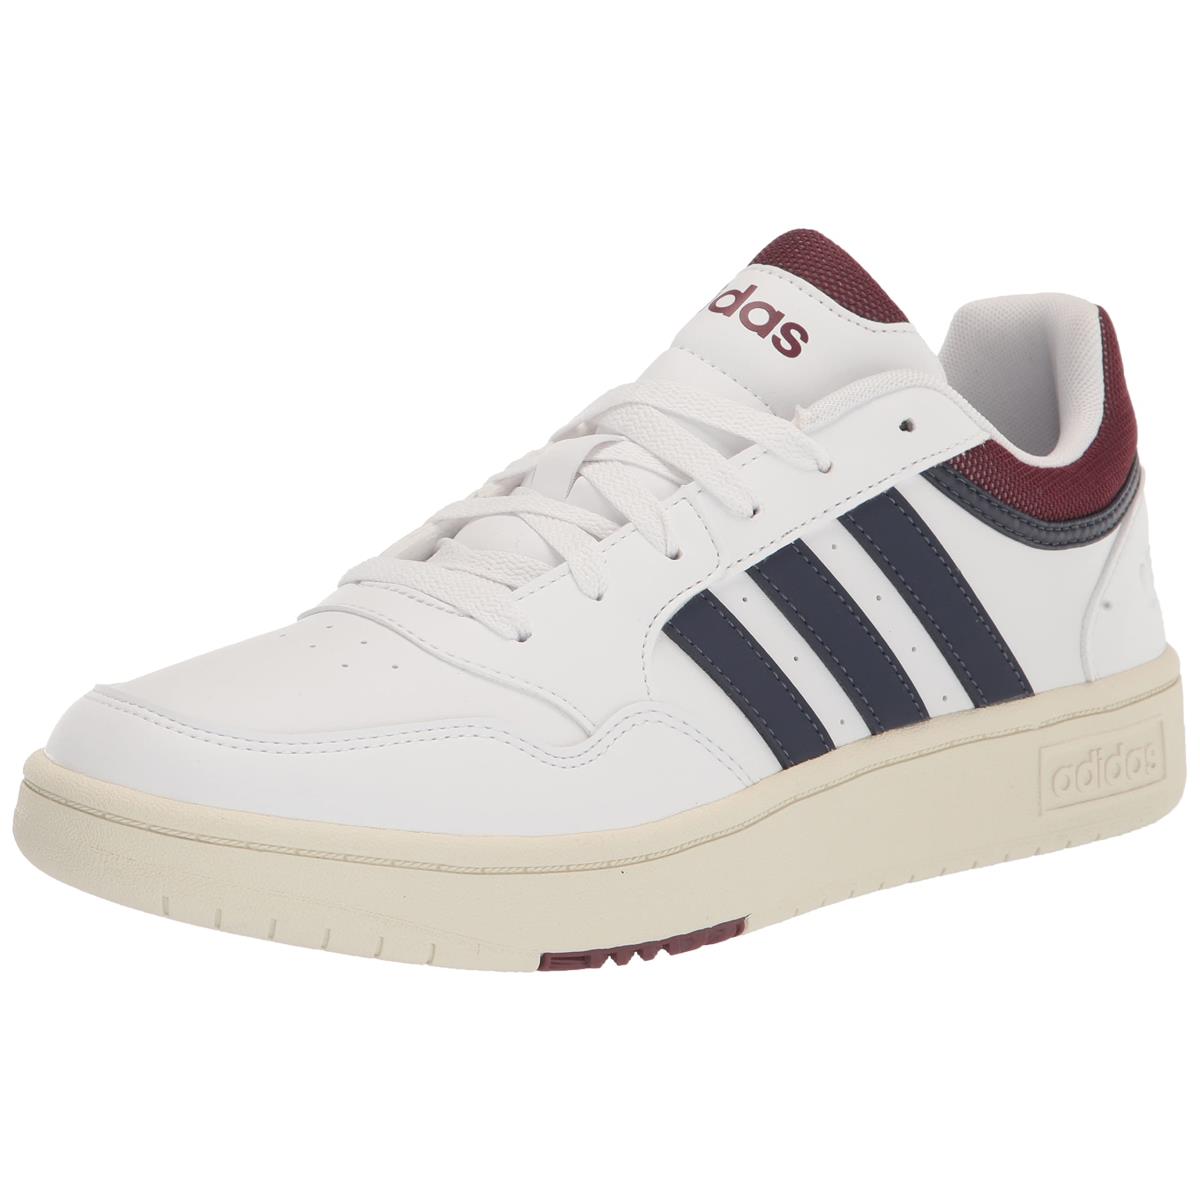 Adidas Men`s Hoops 3.0 Basketball Shoe White/Shadow Navy/Shadow Red